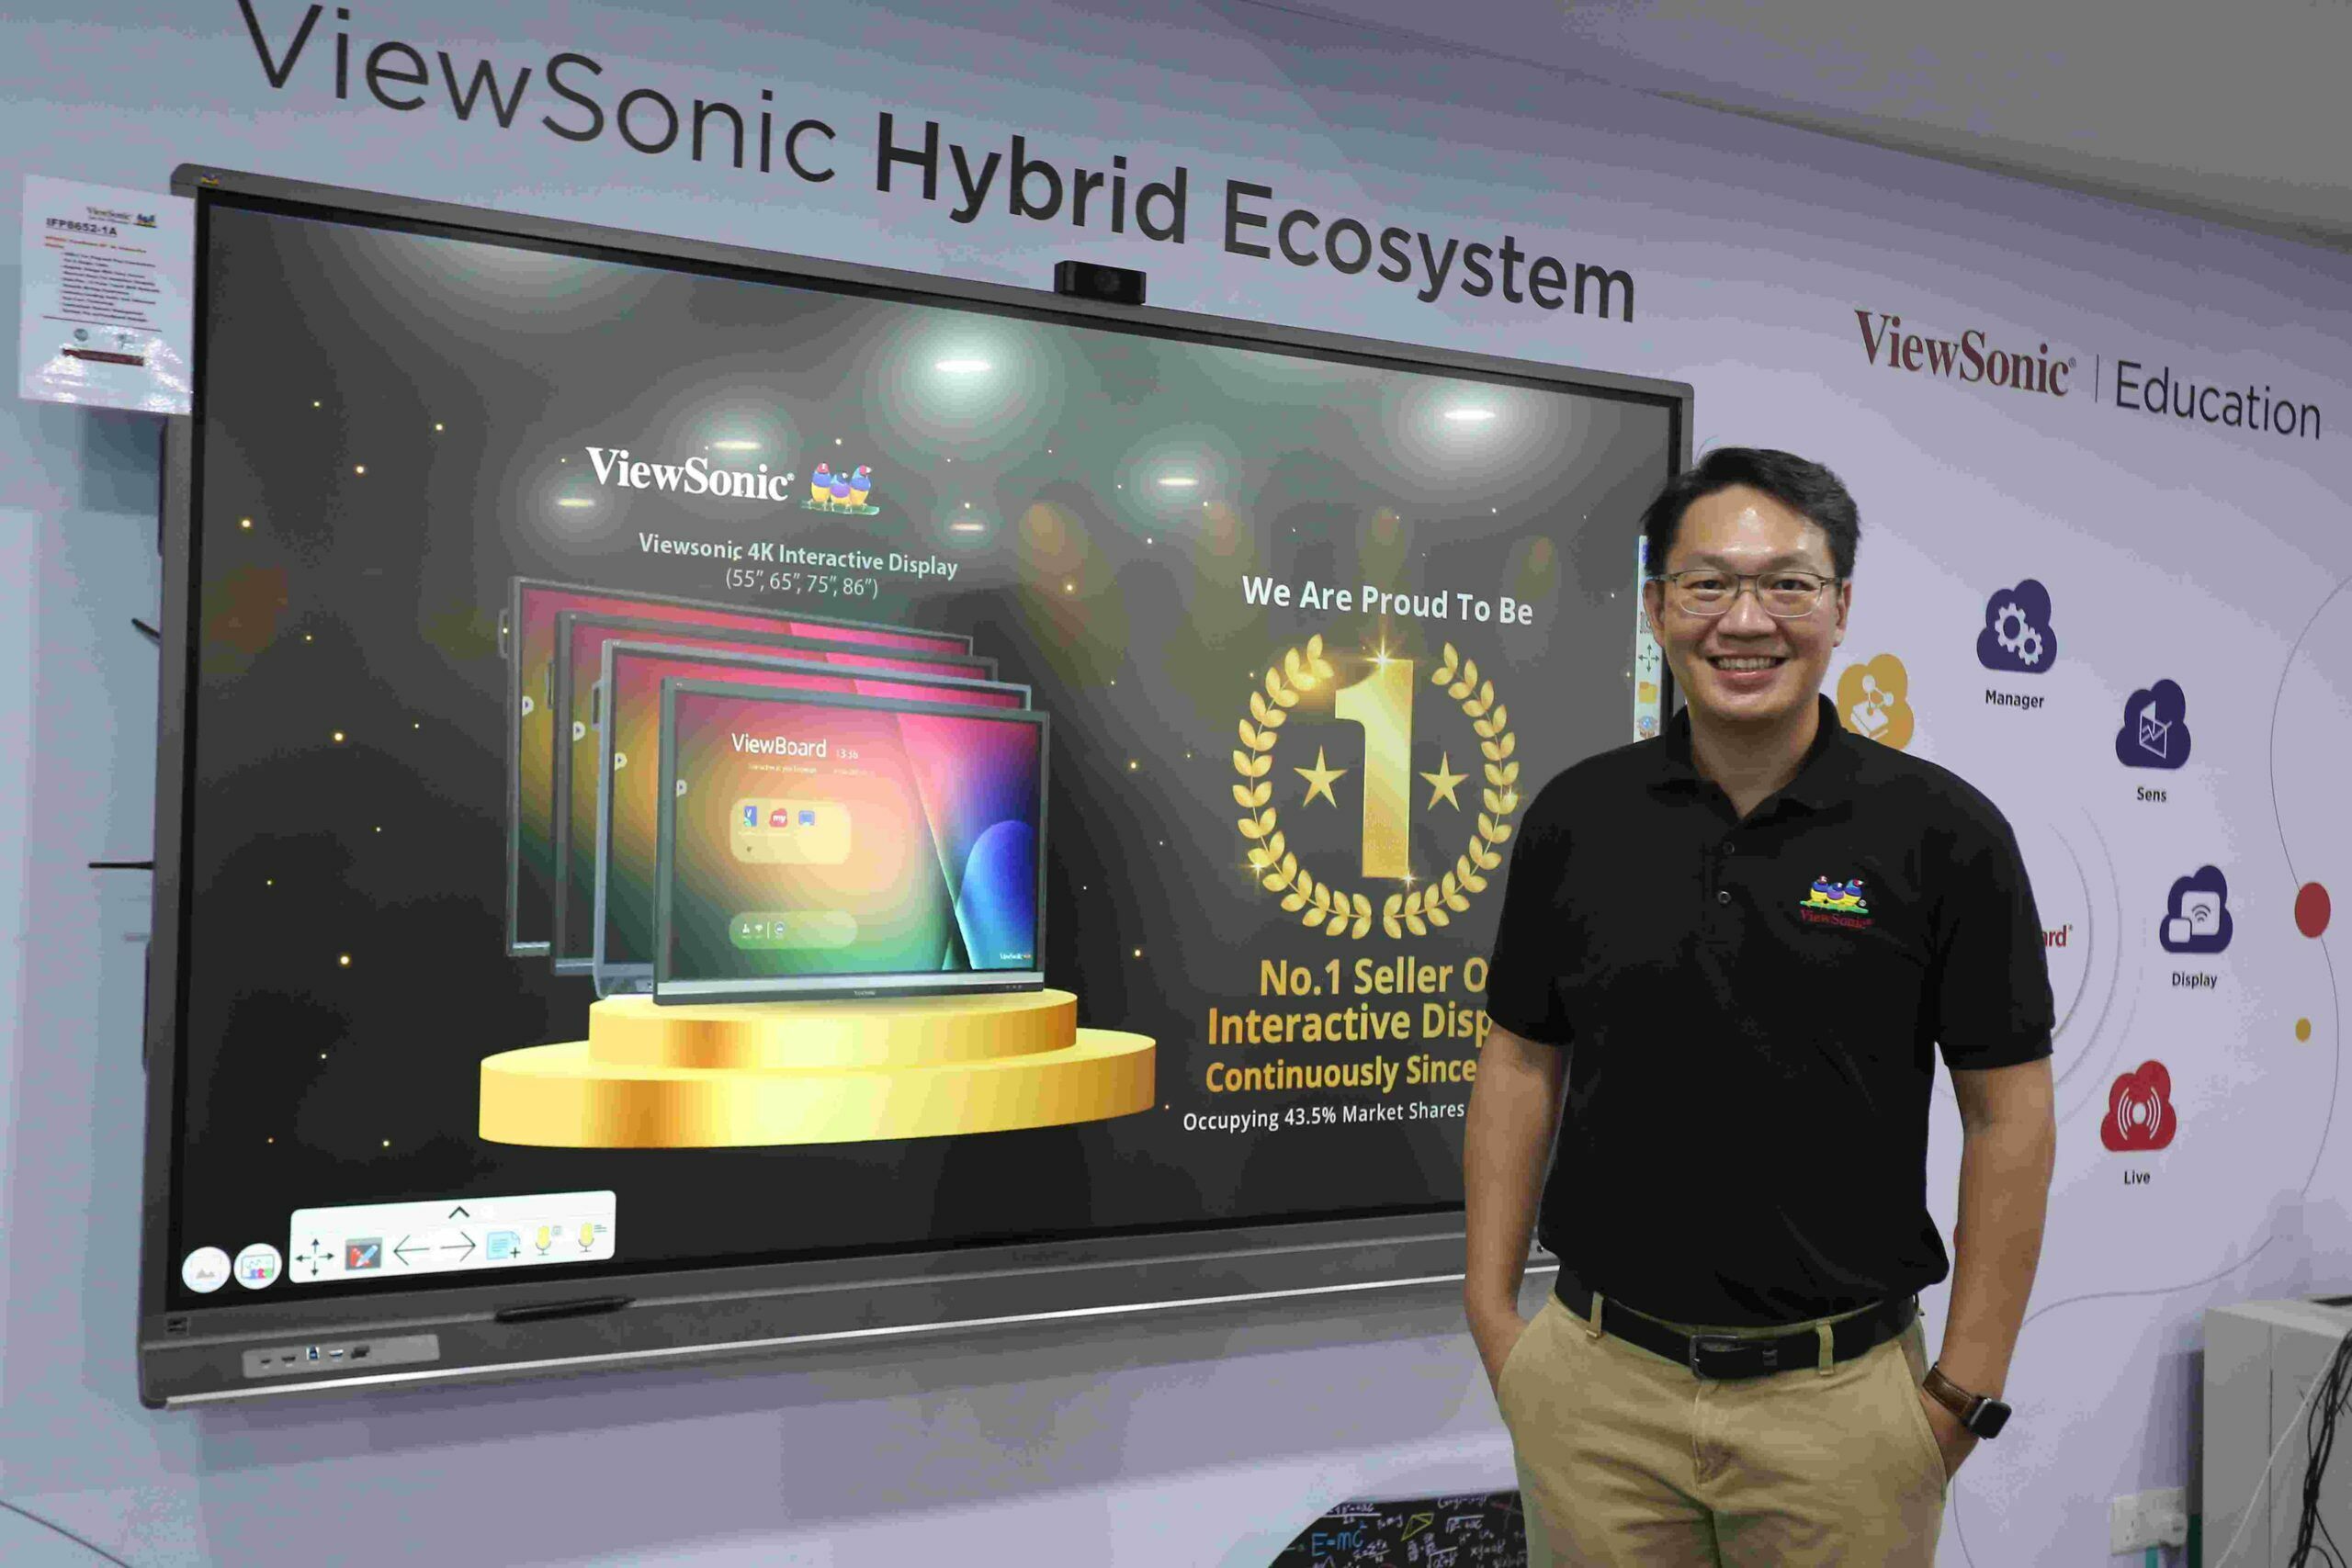 ViewSonic Introduces Latest 3rd Gen LED Projectors and ViewBoard Interactive Display